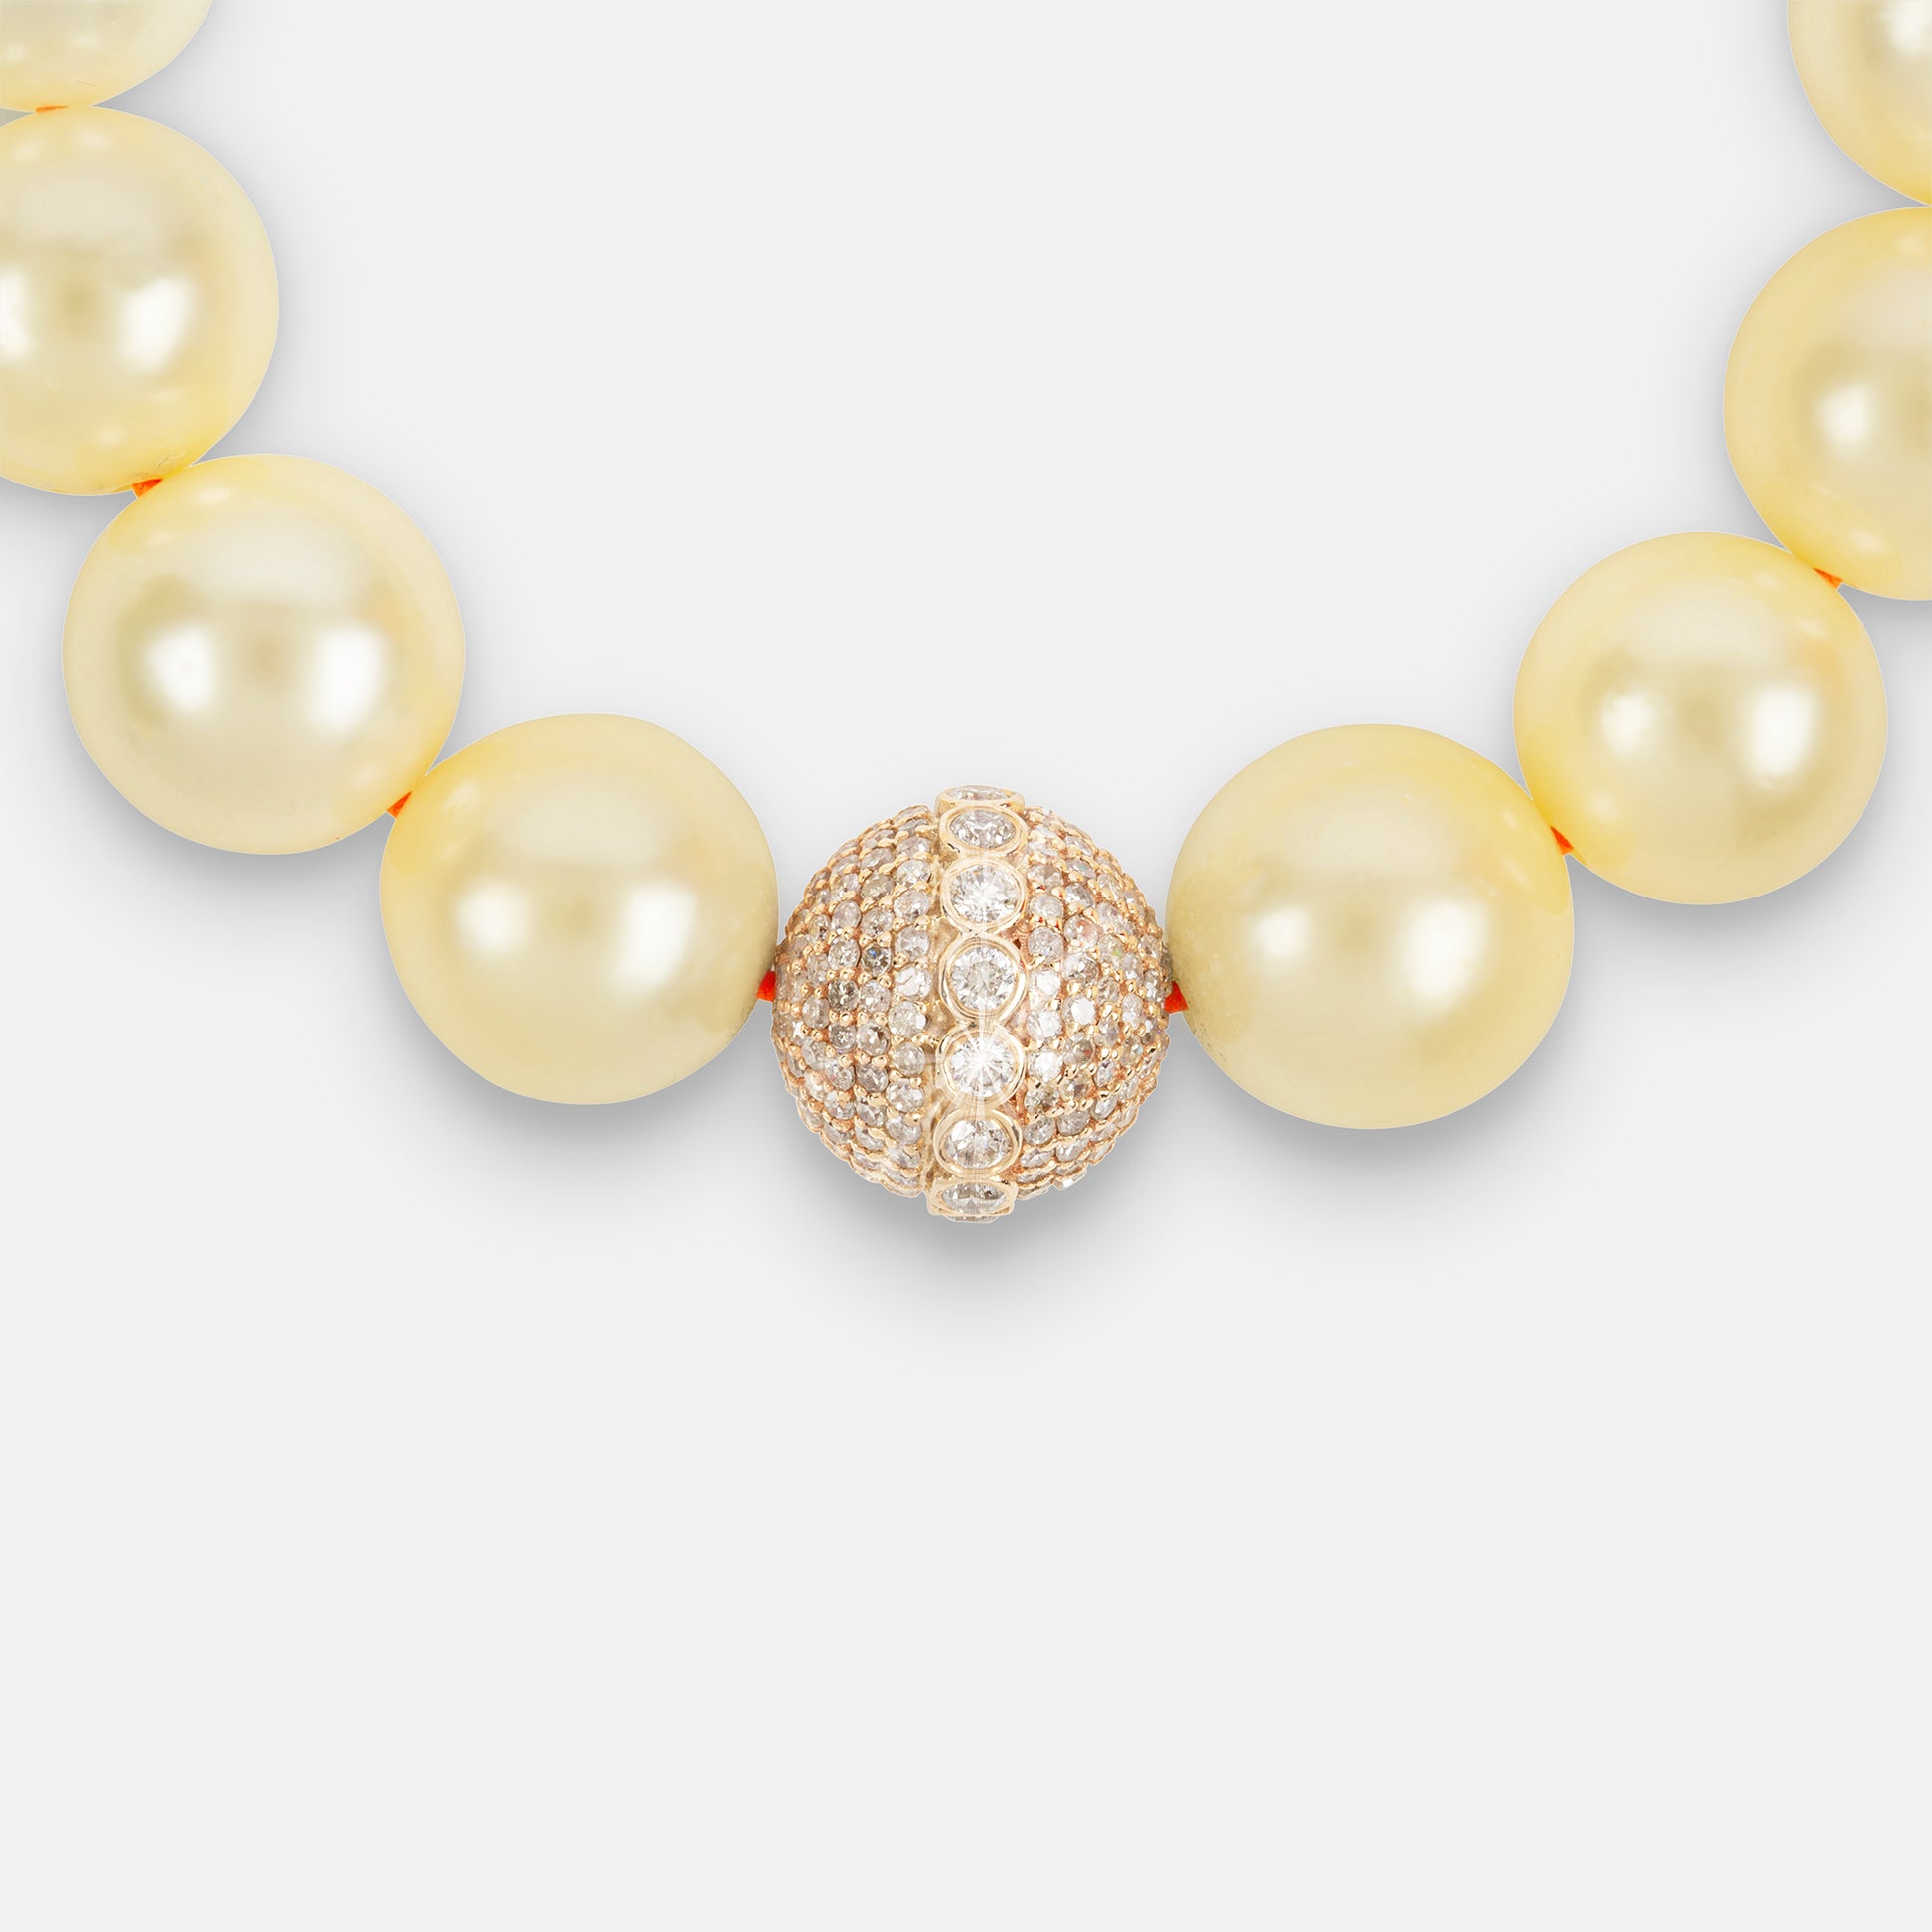 Ray_18K_Gold_Pearl_Orb_Bracelet_Close_Up